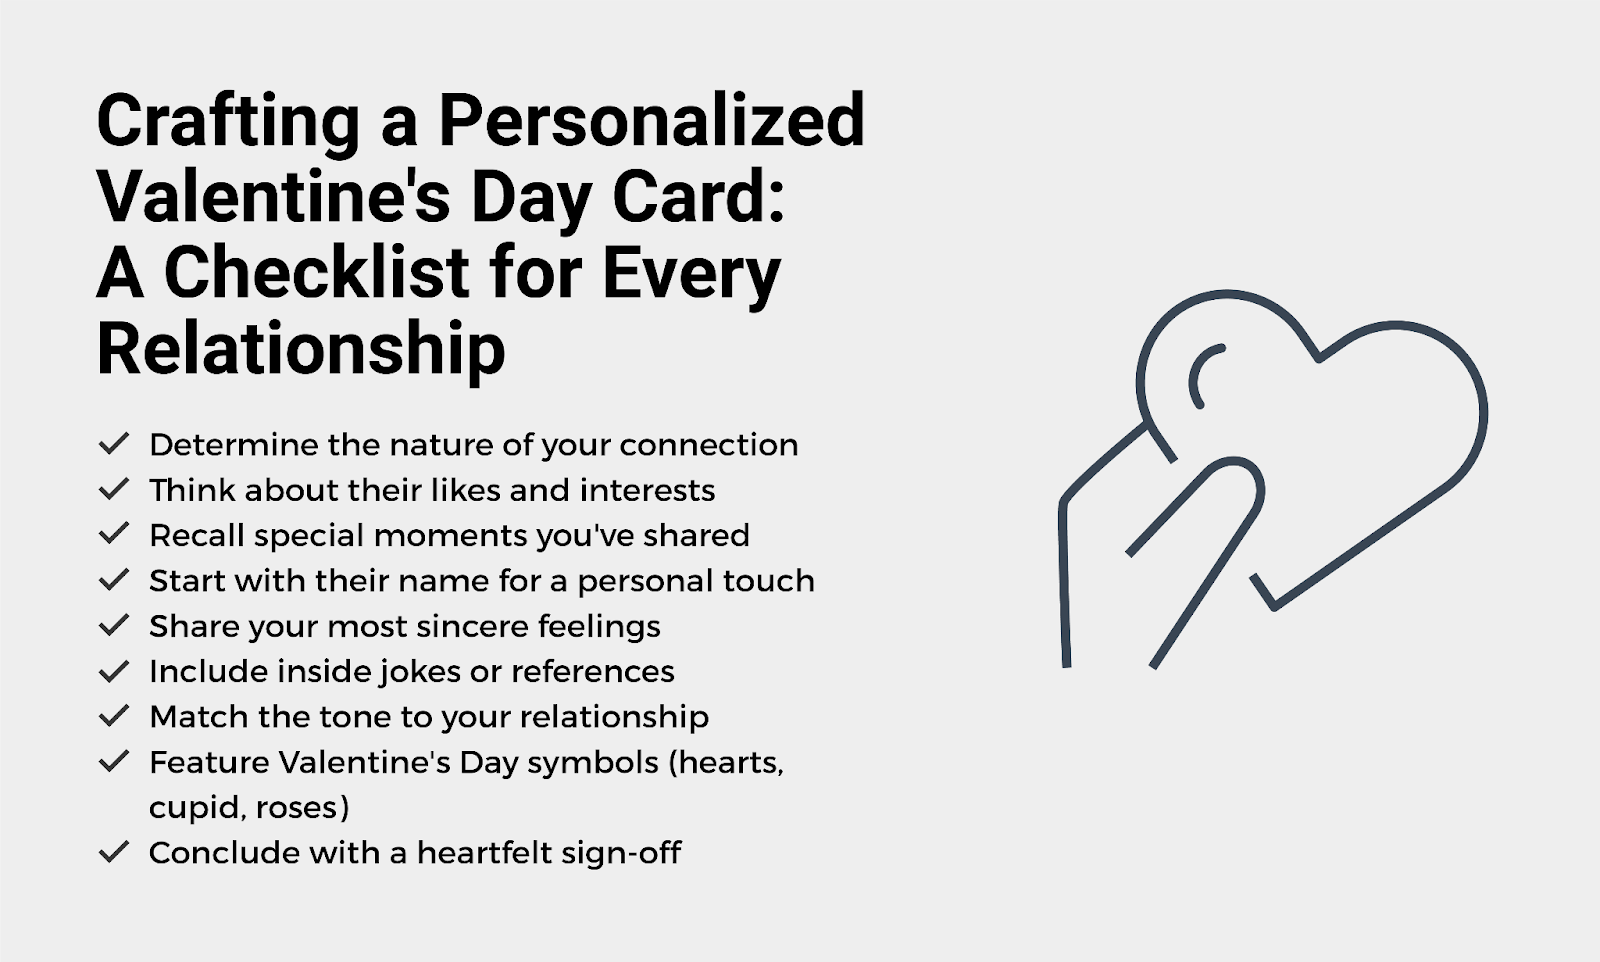 Valentine’s Day card checklist for every relationship